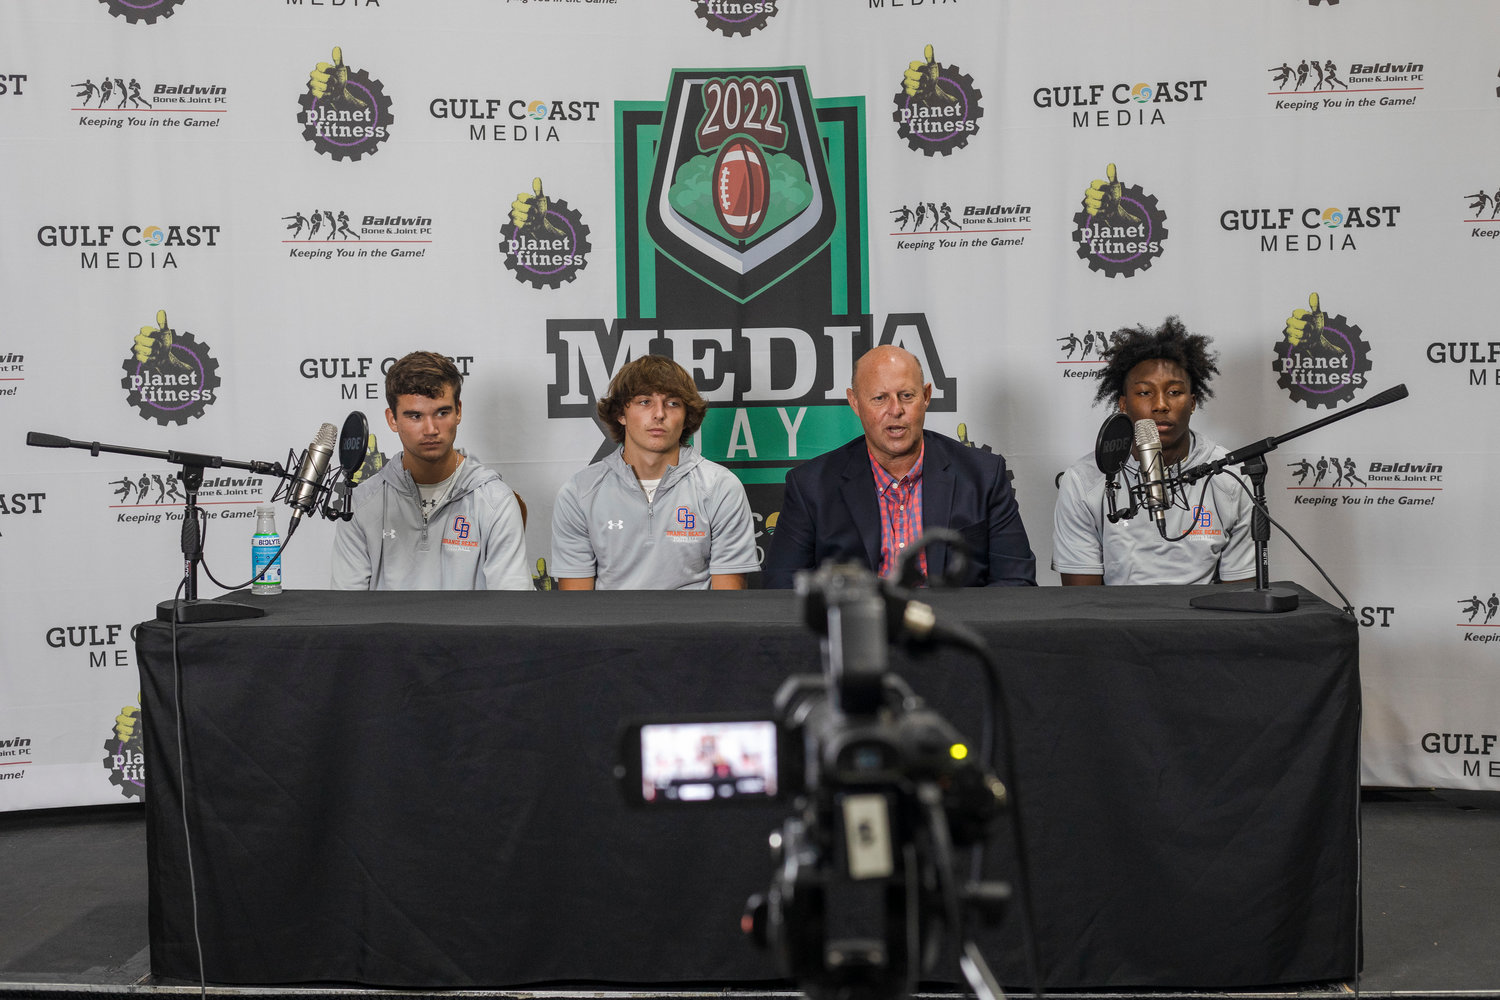 The Orange Beach Makos were represented by John Wallace Holladay, Cash Turner, head coach Jamey DuBose and Chris Pearson at the inaugural Gulf Coast Media Day event Aug. 16, 2022, at the Orange Beach Event Center. All three athletes have committed to Division I football programs after Holladay announced his pledge to Troy earlier this week. Turner signed with South Alabama Feb. 1 and Pearson was an early enrollee at Houston after he signed in December.